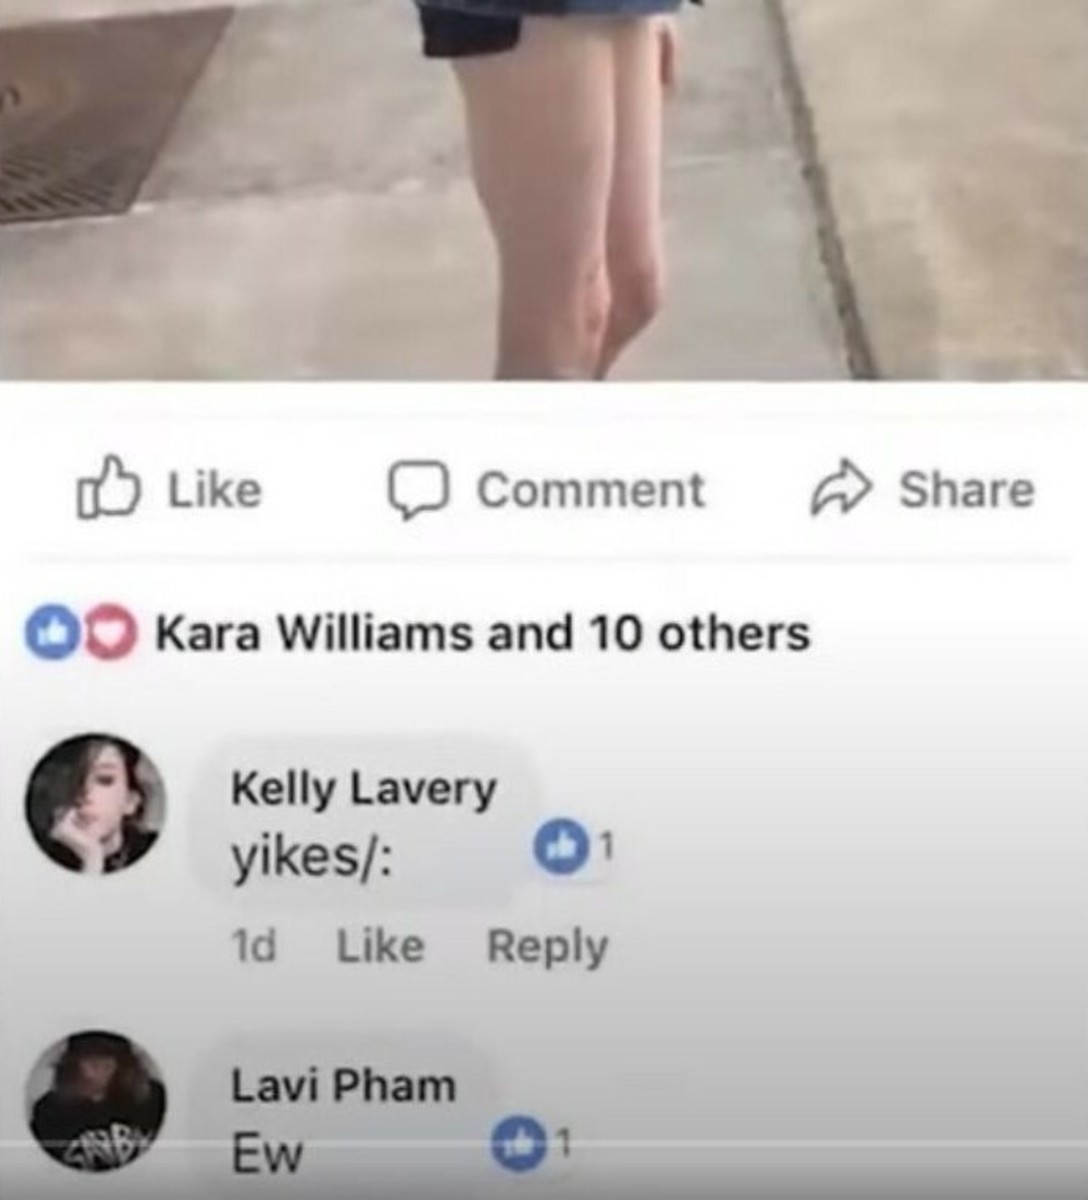 Comments Kelly Lavery and Lavi Pham posted on Mary Collins’ Facebook post